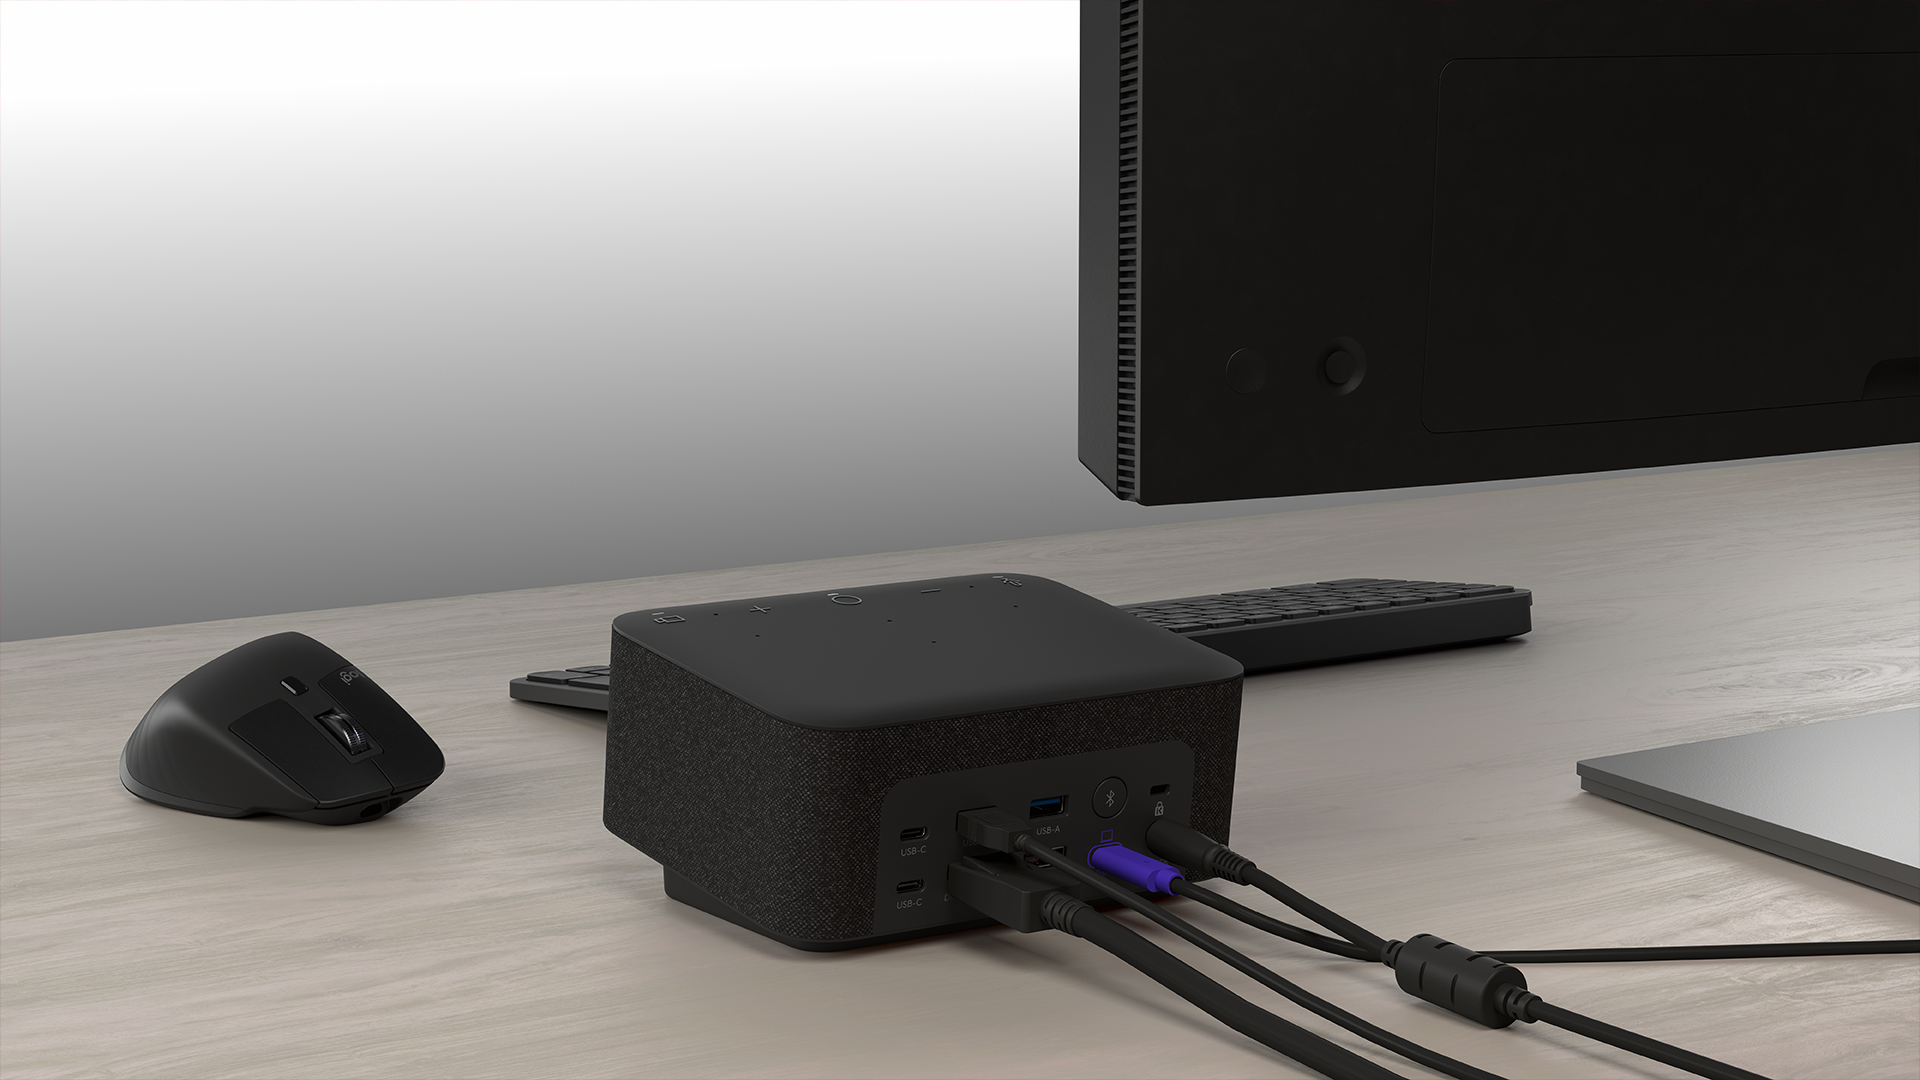 The Logi Dock's backside with several USB ports.